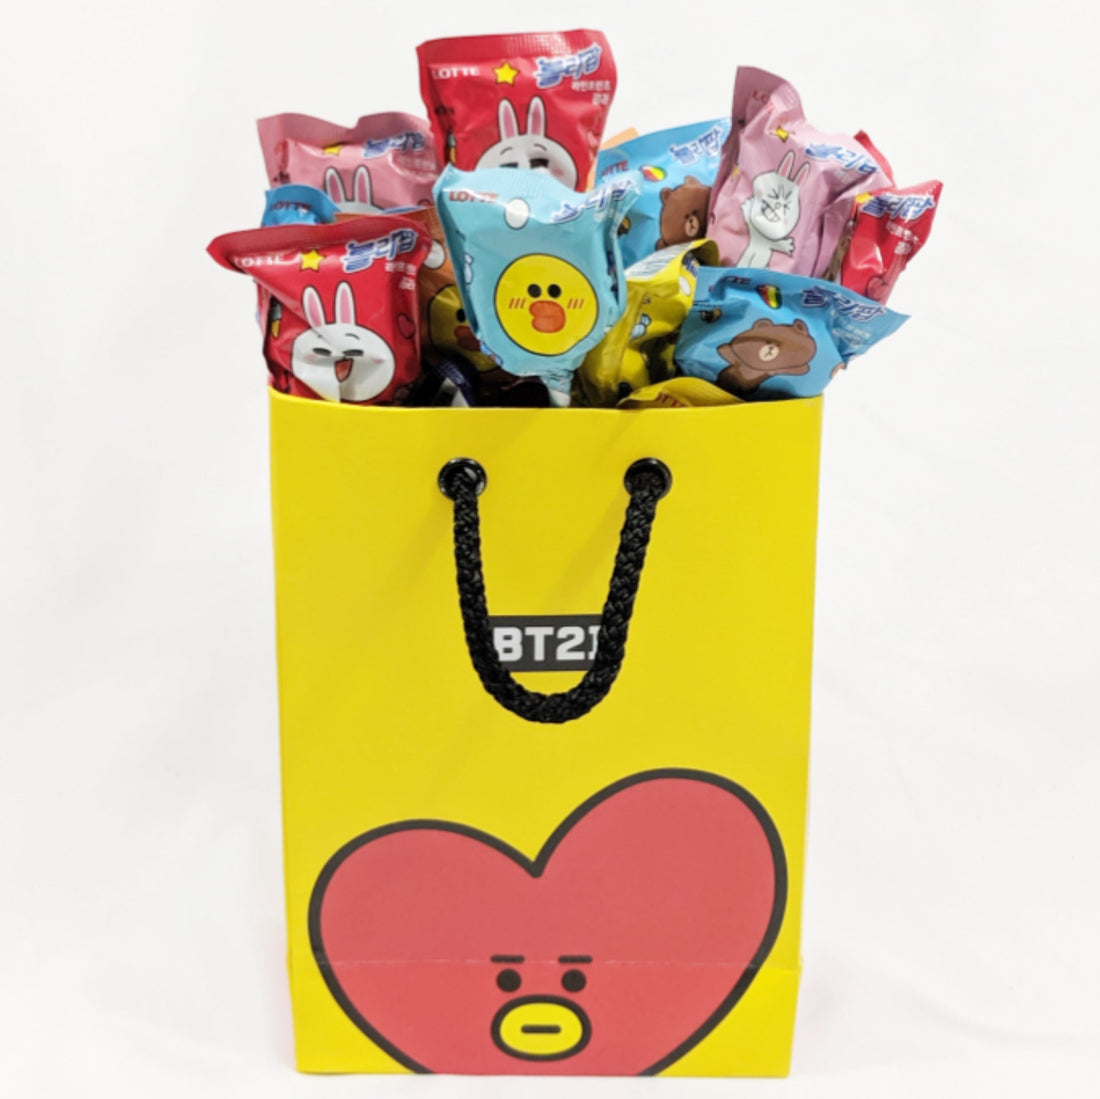 Official BT21 Shopping Bag Is Here For You!